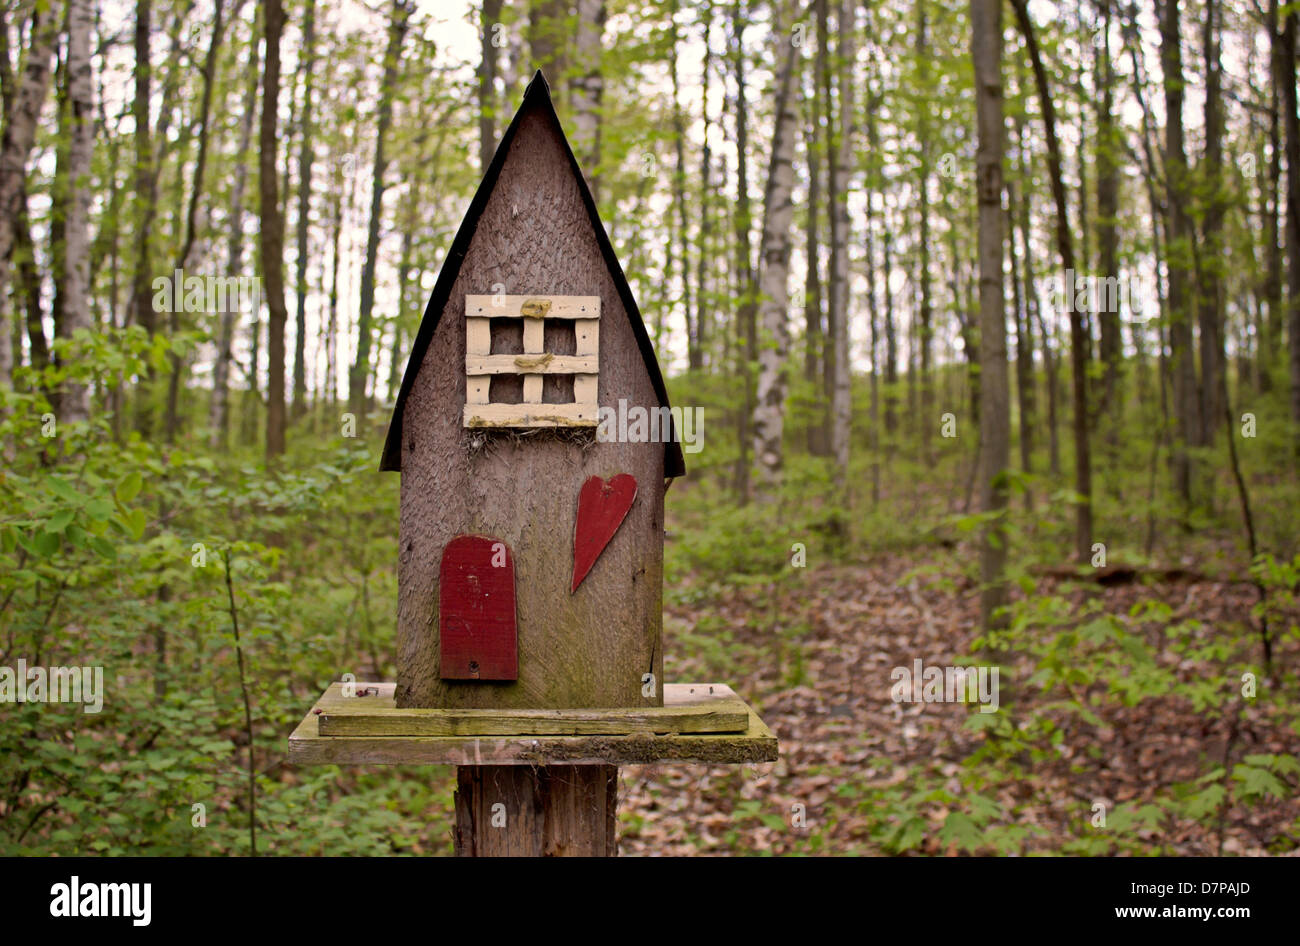 Rustic birdhouse in the forest. Stock Photo